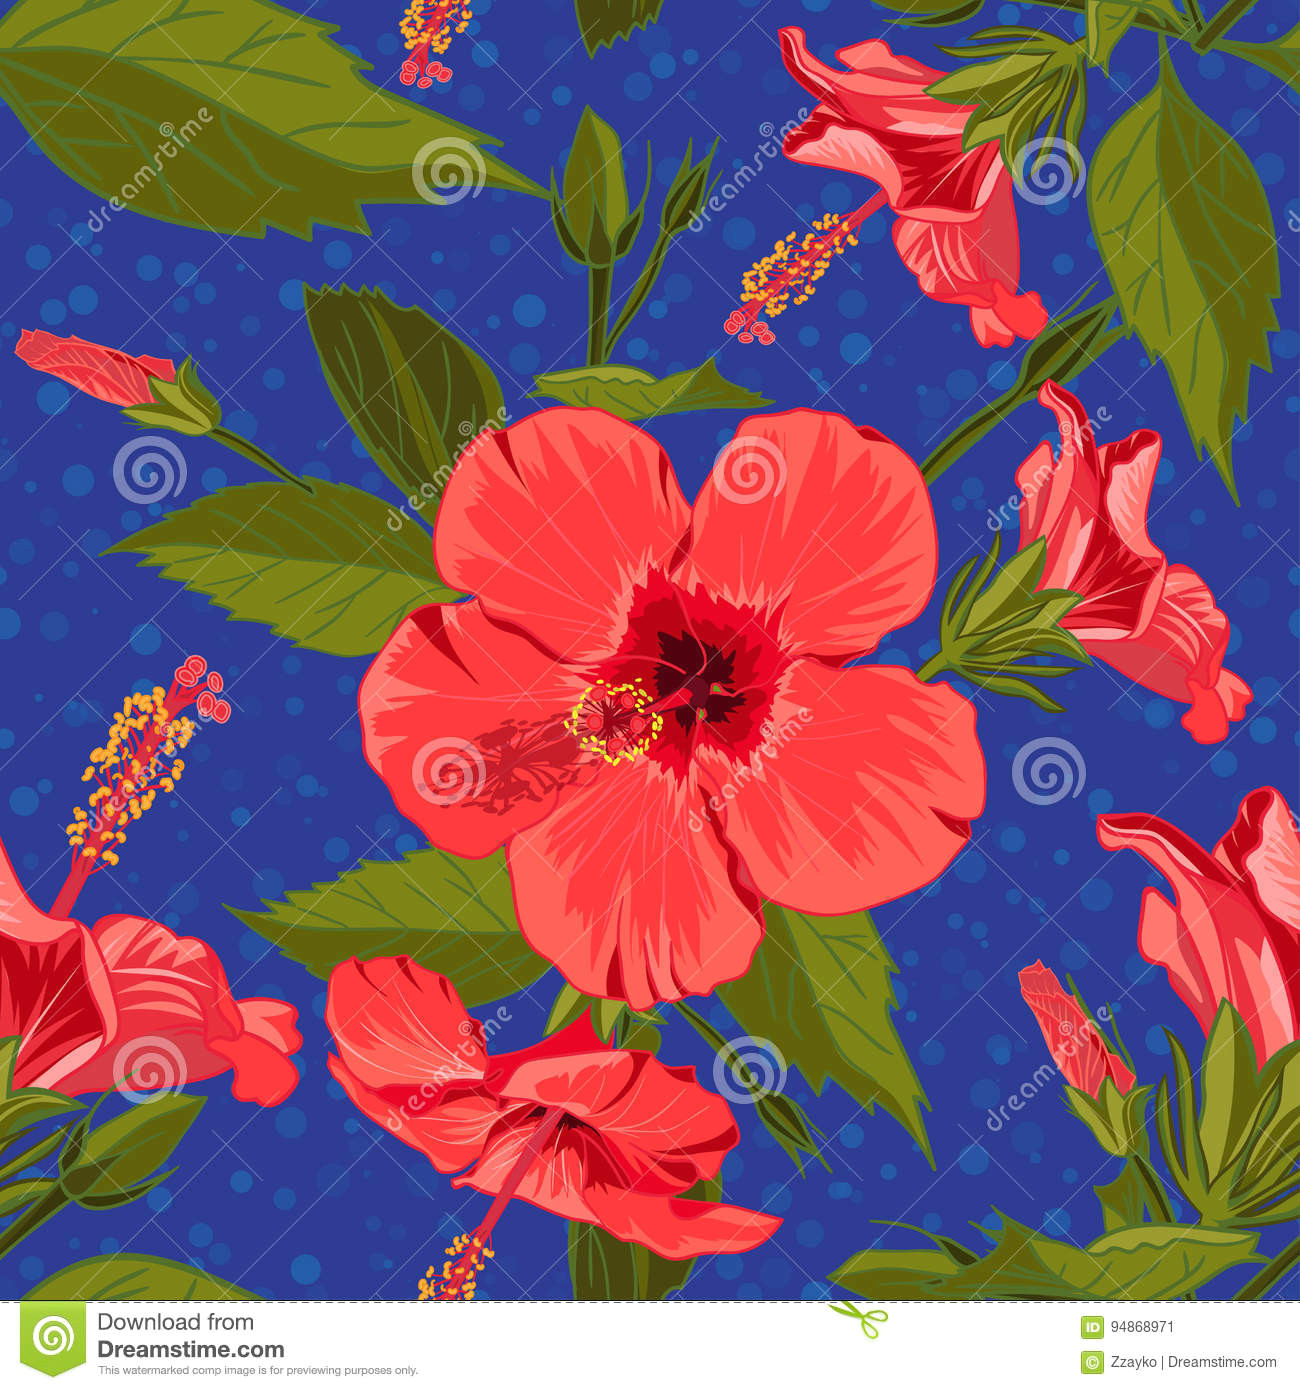 Drawing Of Tropical Flowers Seamless Hand Drawn Tropical Pattern with Jungle Exotic Hibiscus